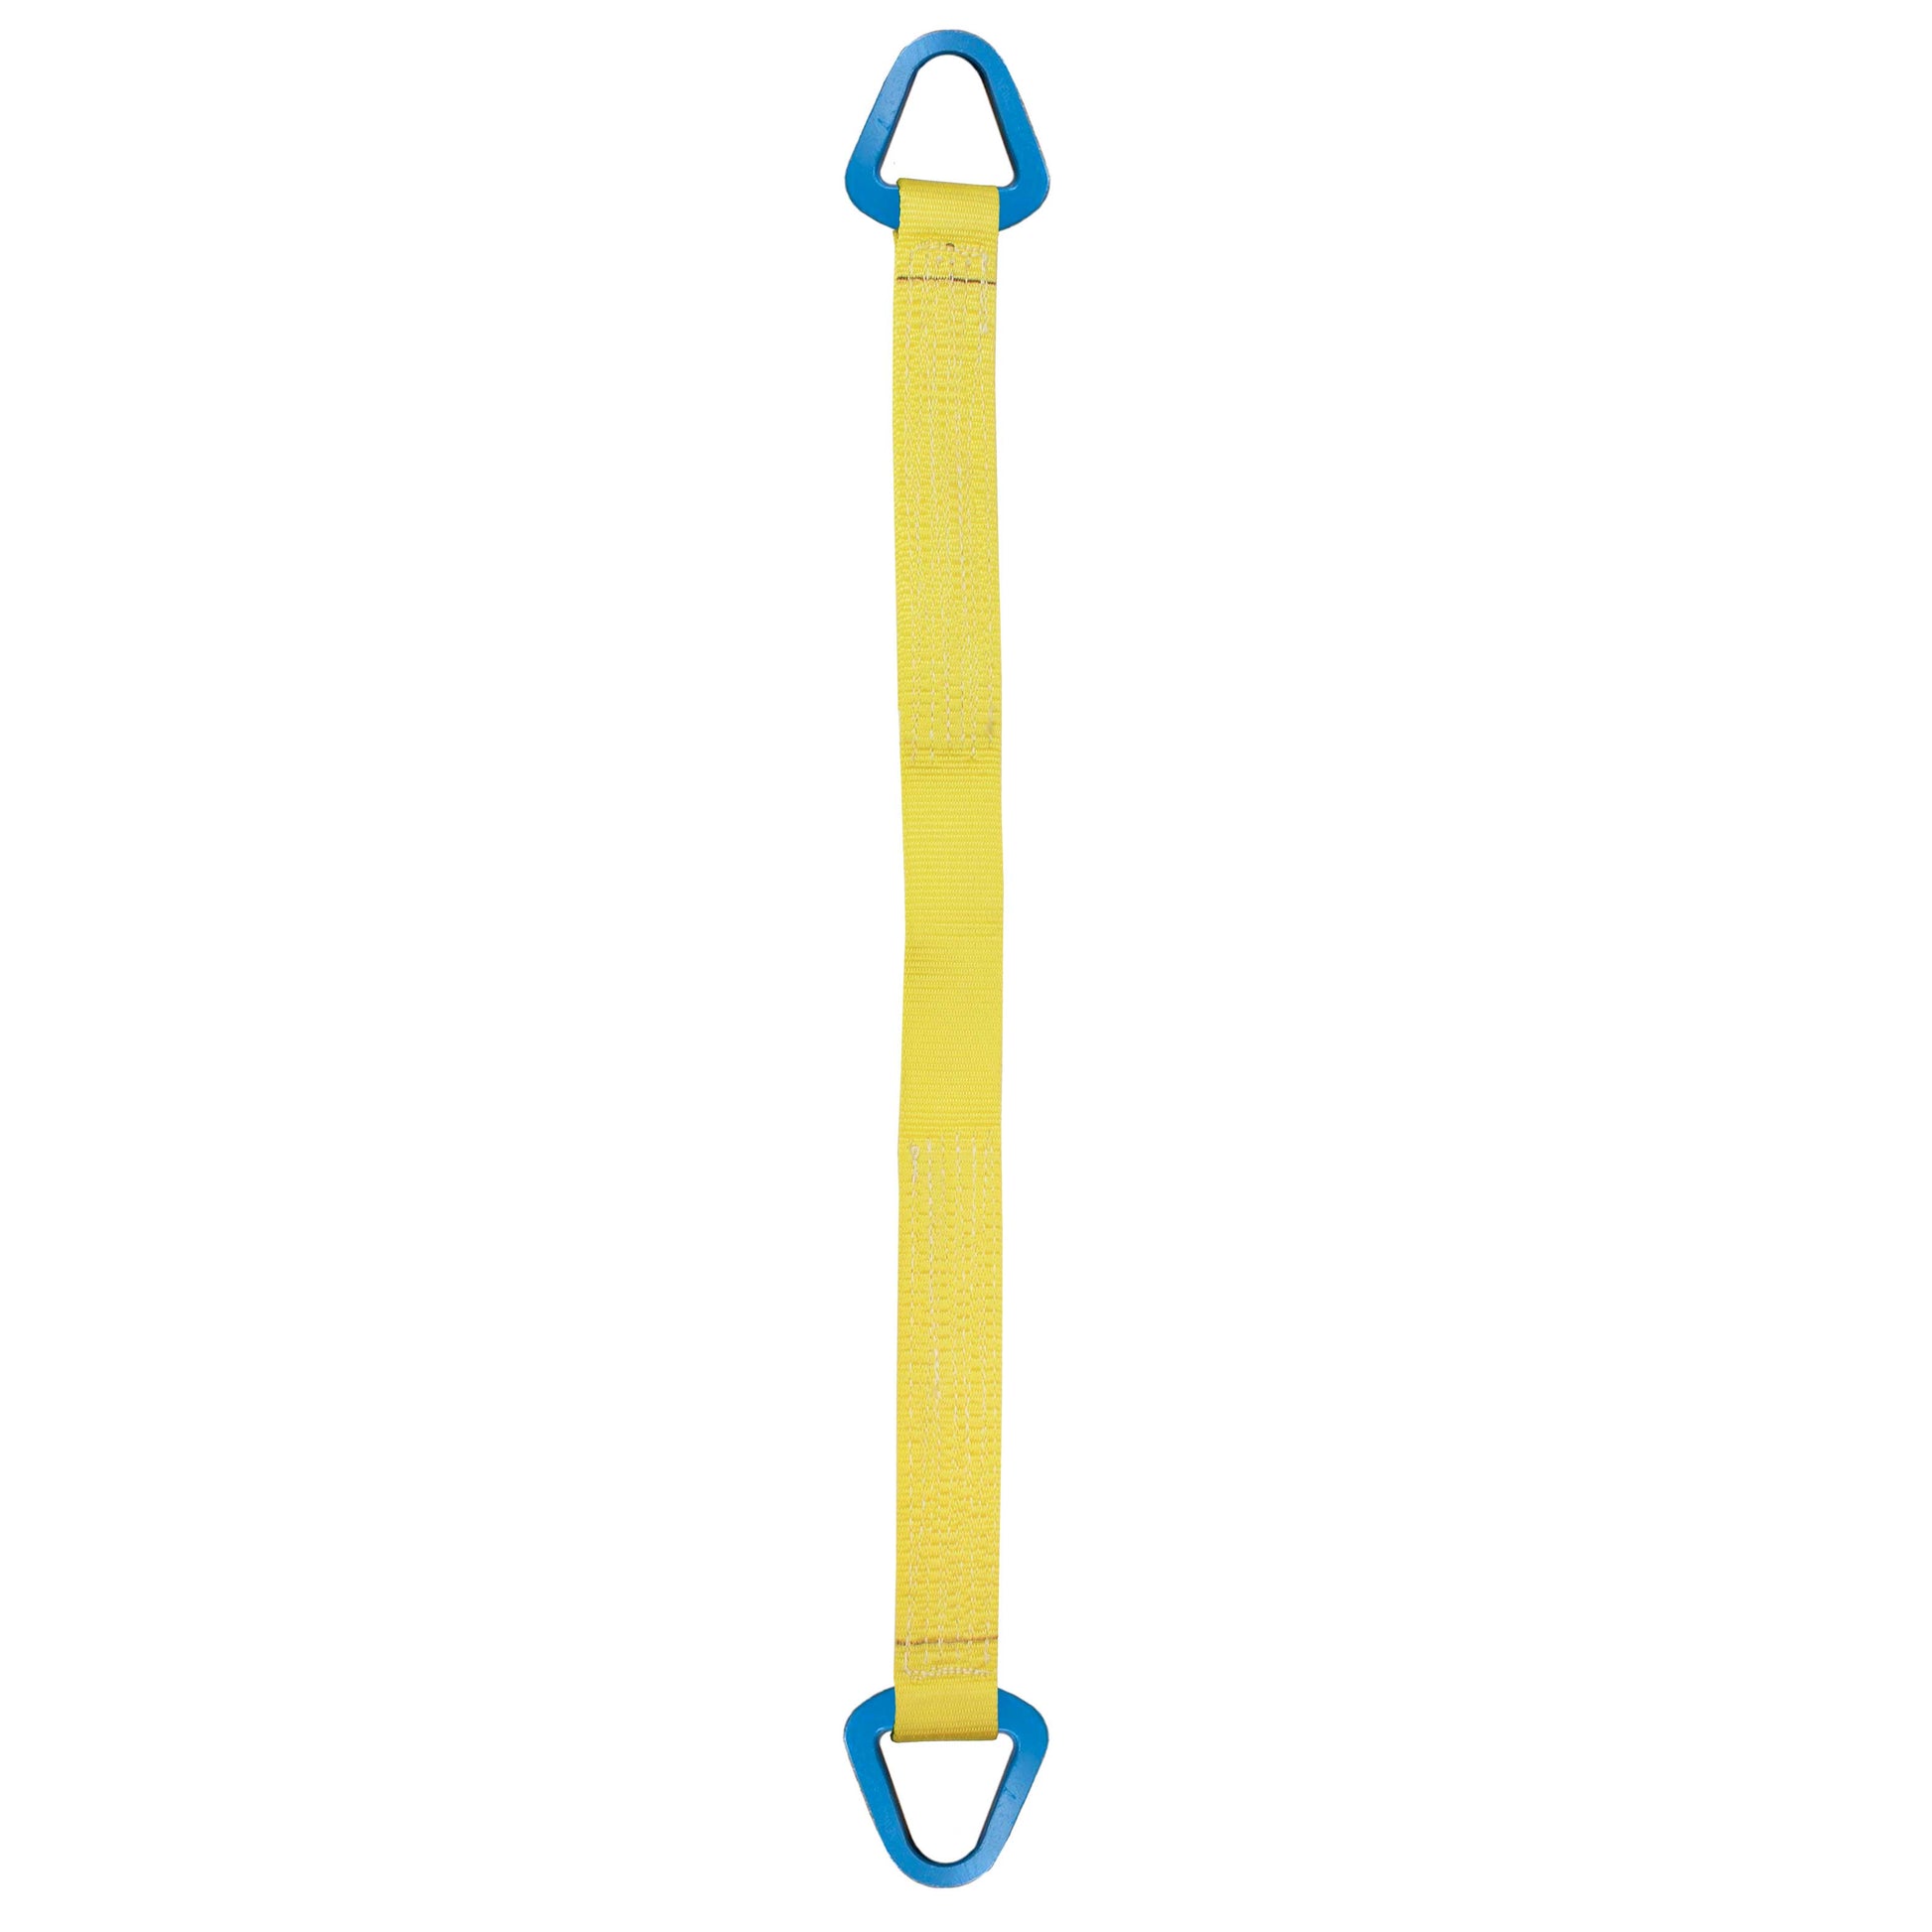 Nylon Lifting Sling Triangle 2 inch x 8 foot 2ply image 1 of 2